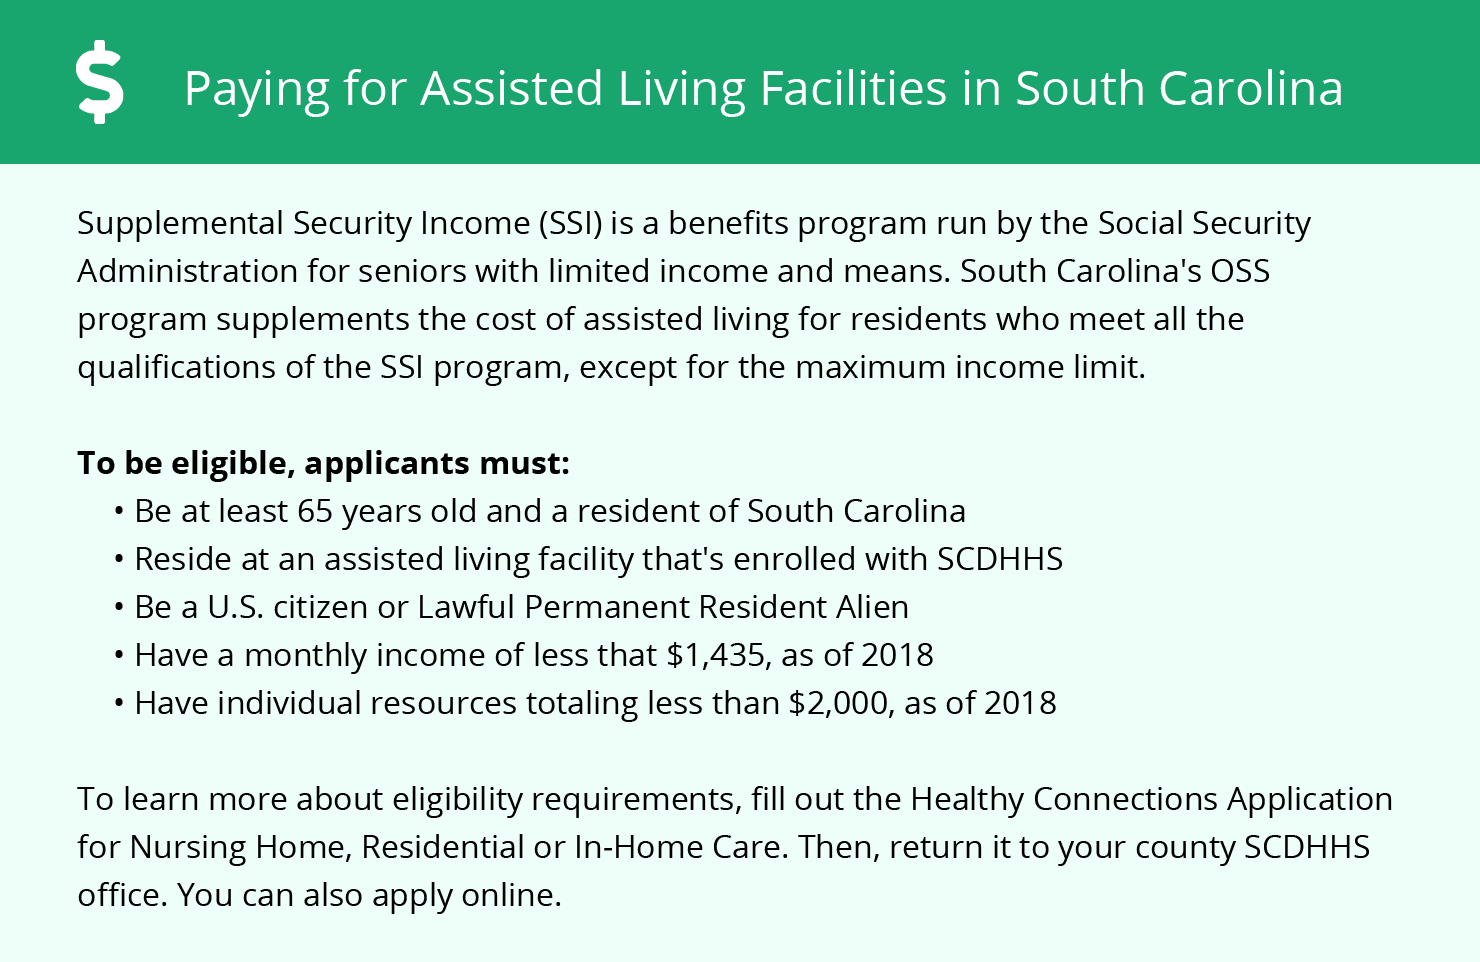 Paying for Assisted Living Facilities in South Carolina